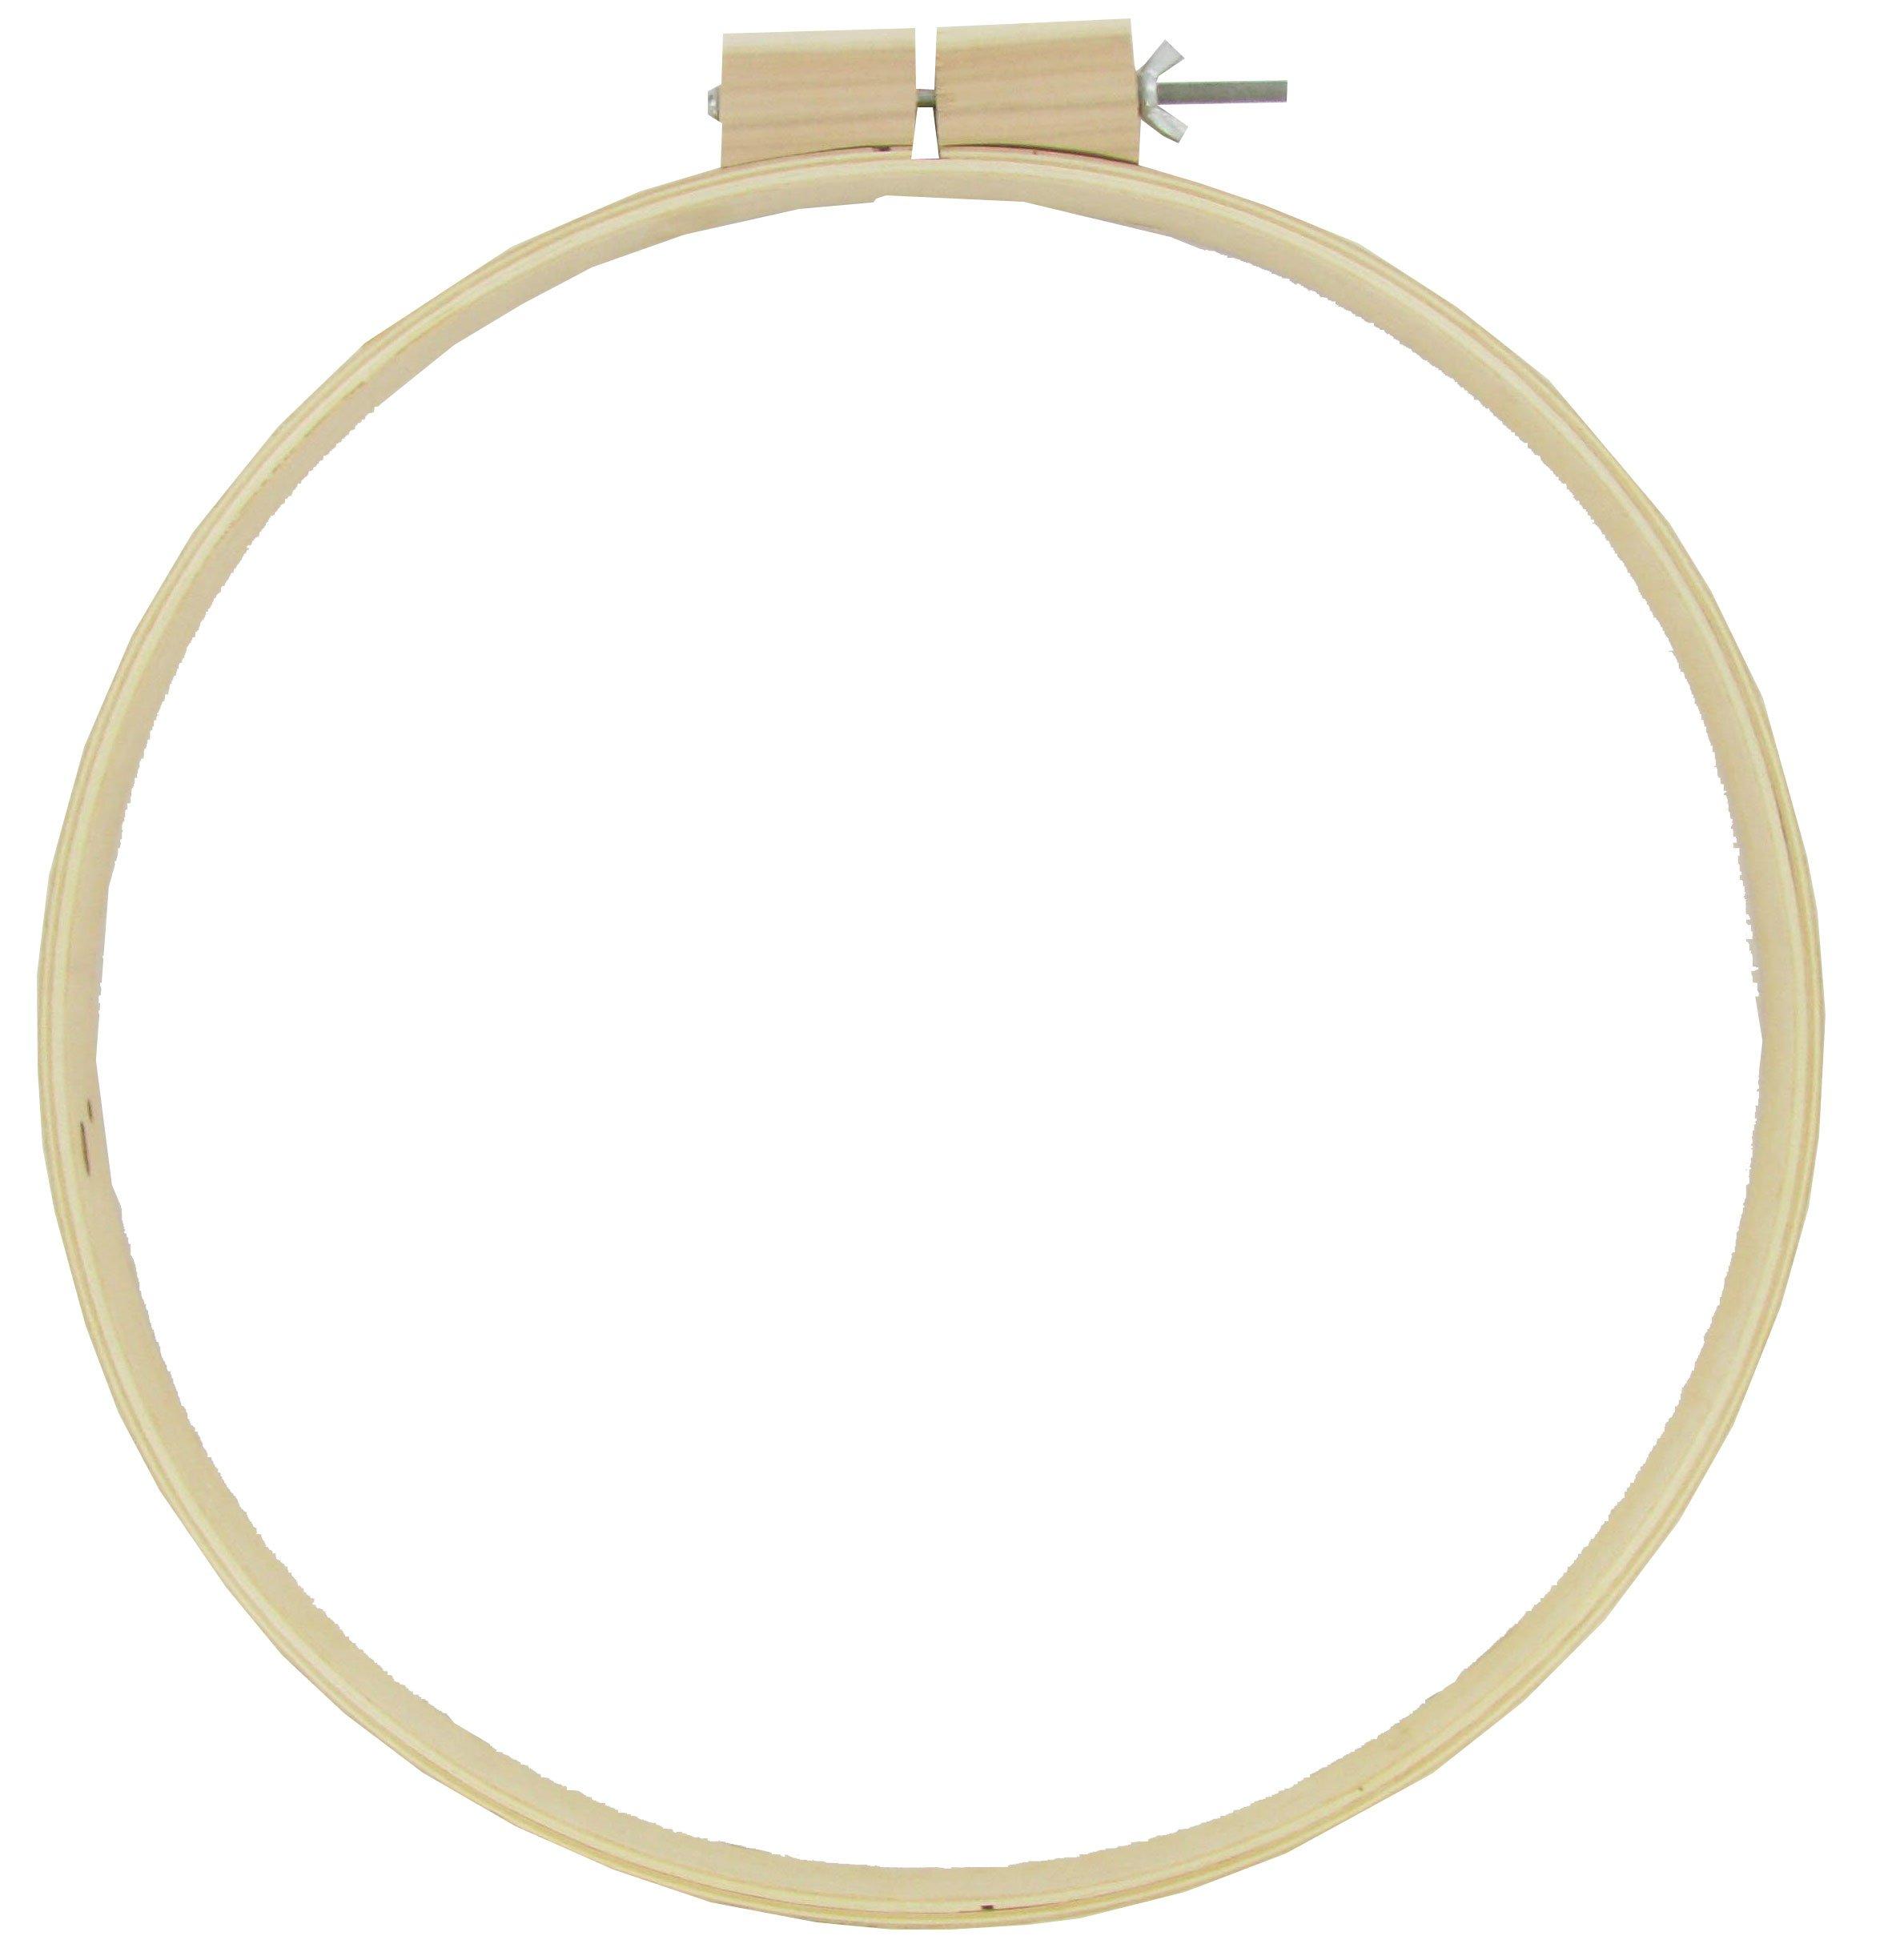 Wholesale Embroidery Hoops for Recreation and Hobby 